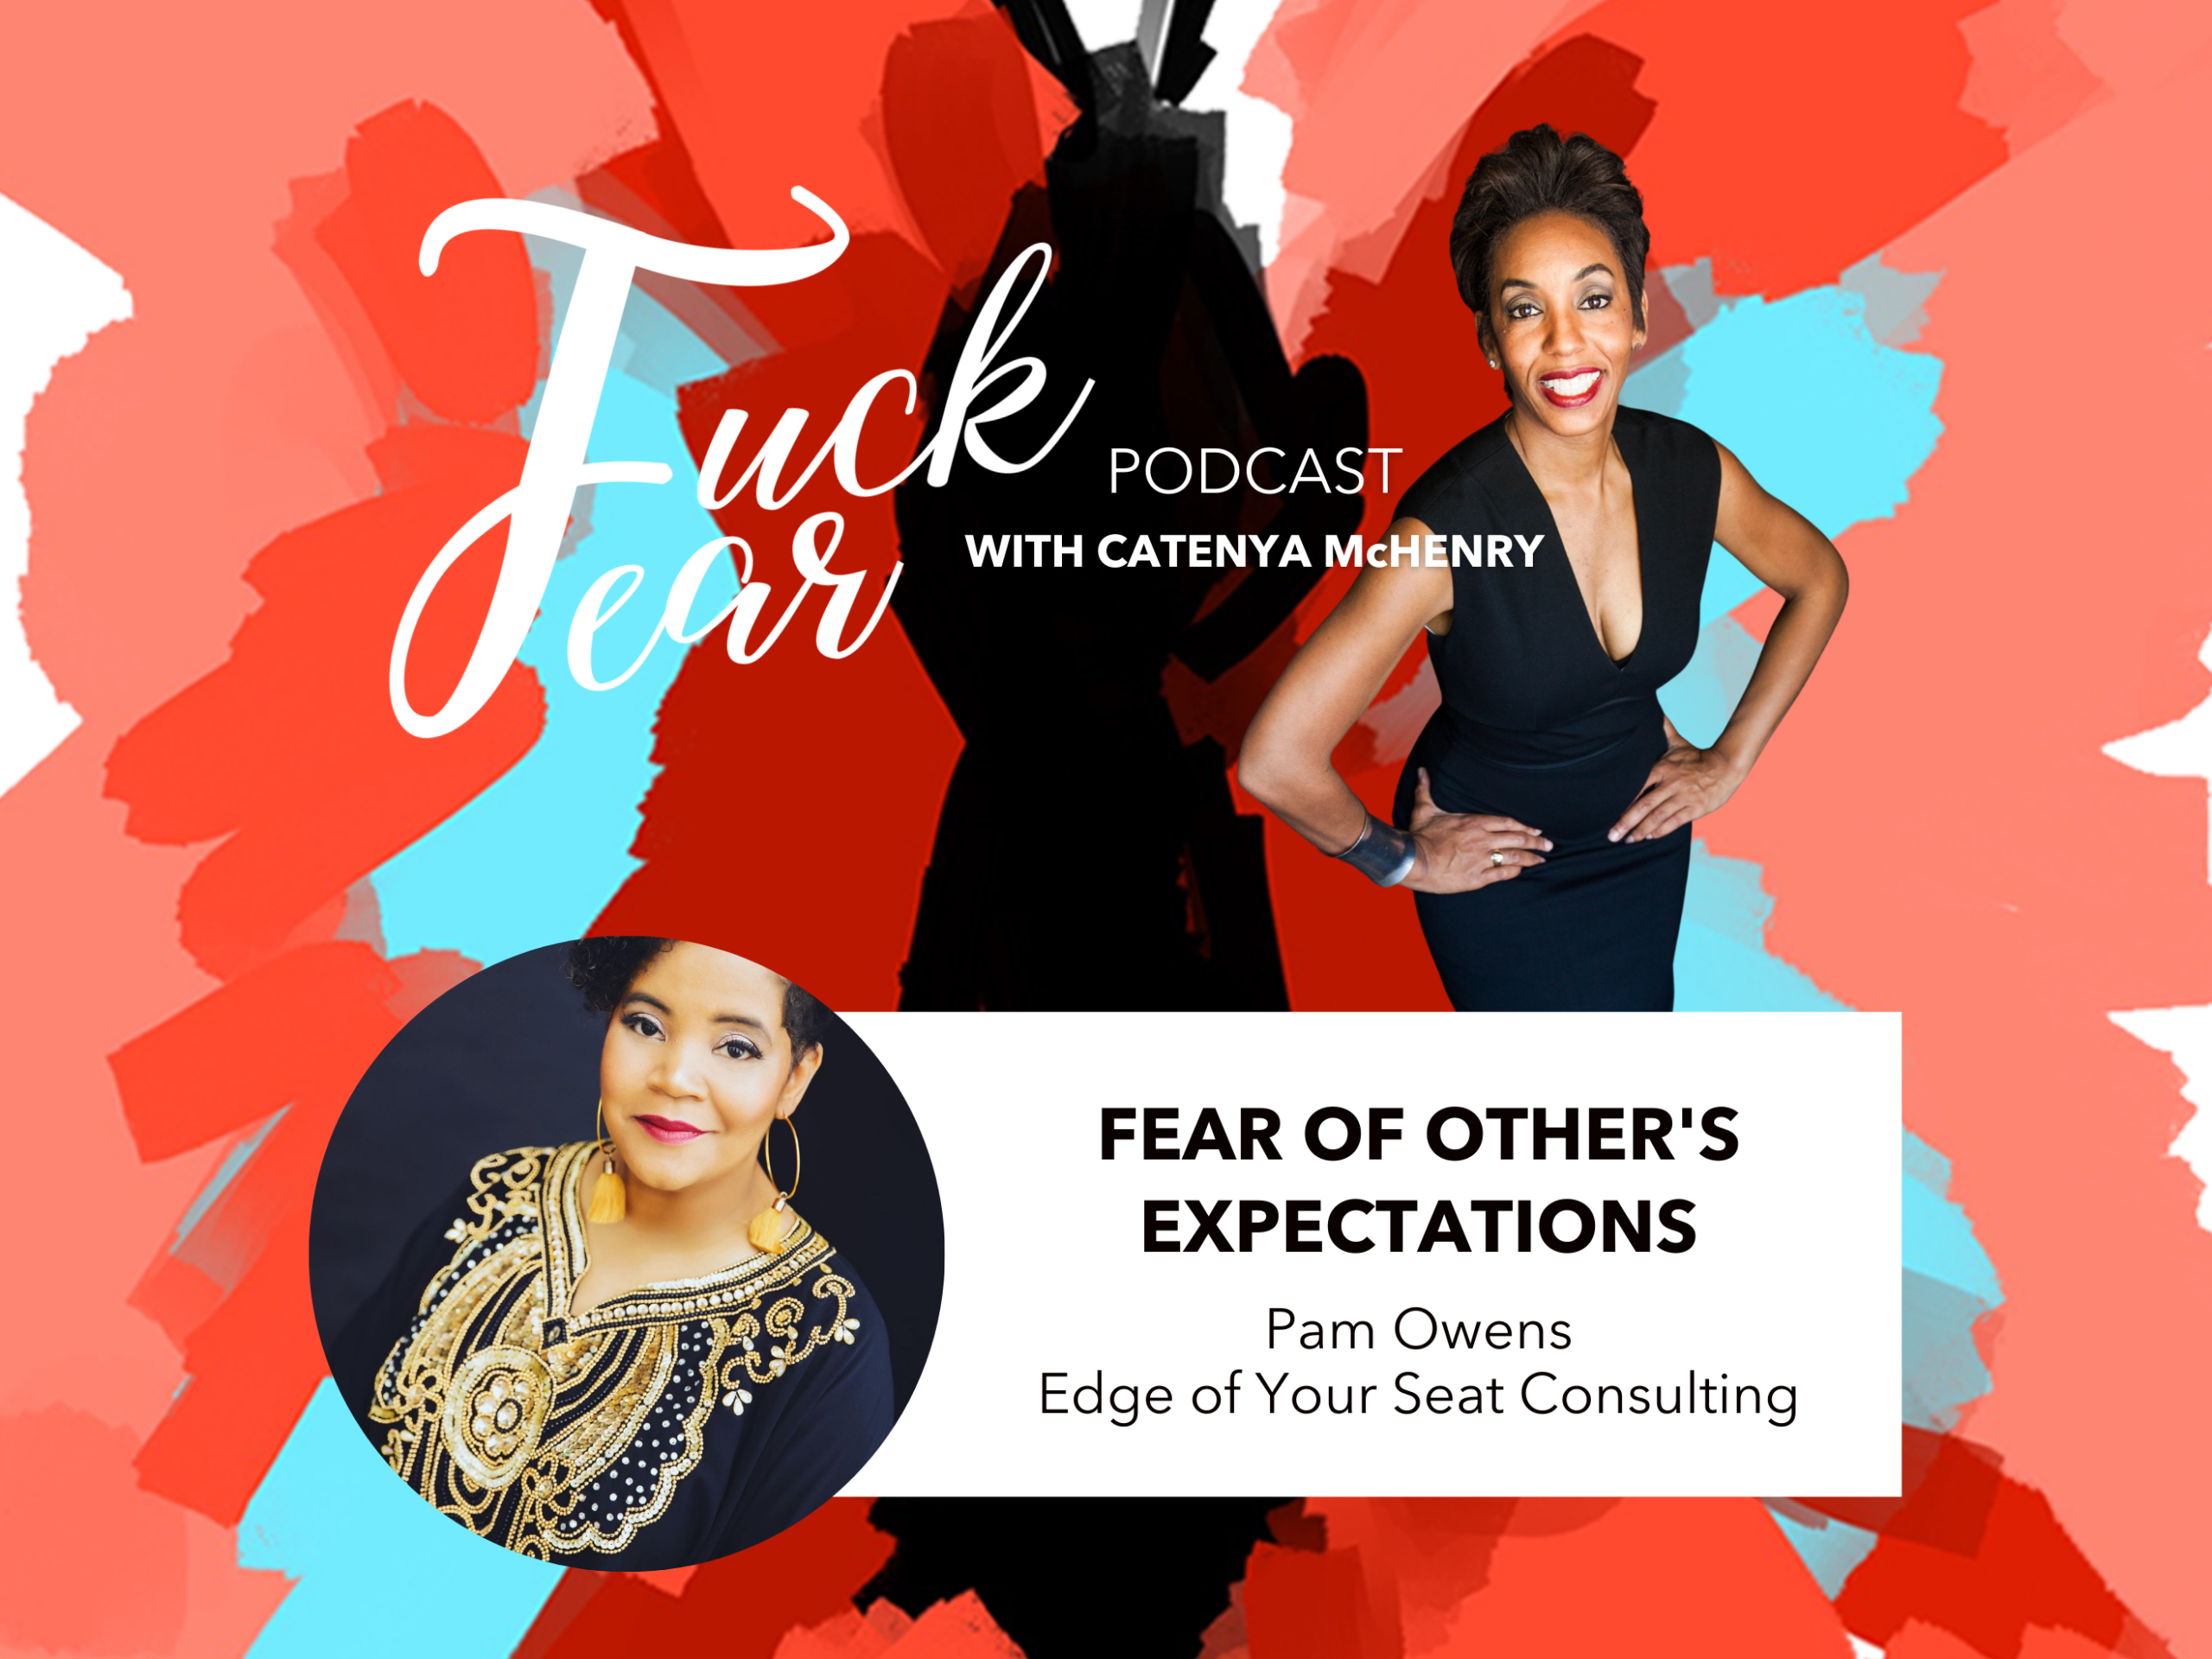 Fuck Fear podcast episode season 2, episode 1 Fear of Other's Expectations with Pam Benson Owens, CEO of Edge of Your Seat Consulting